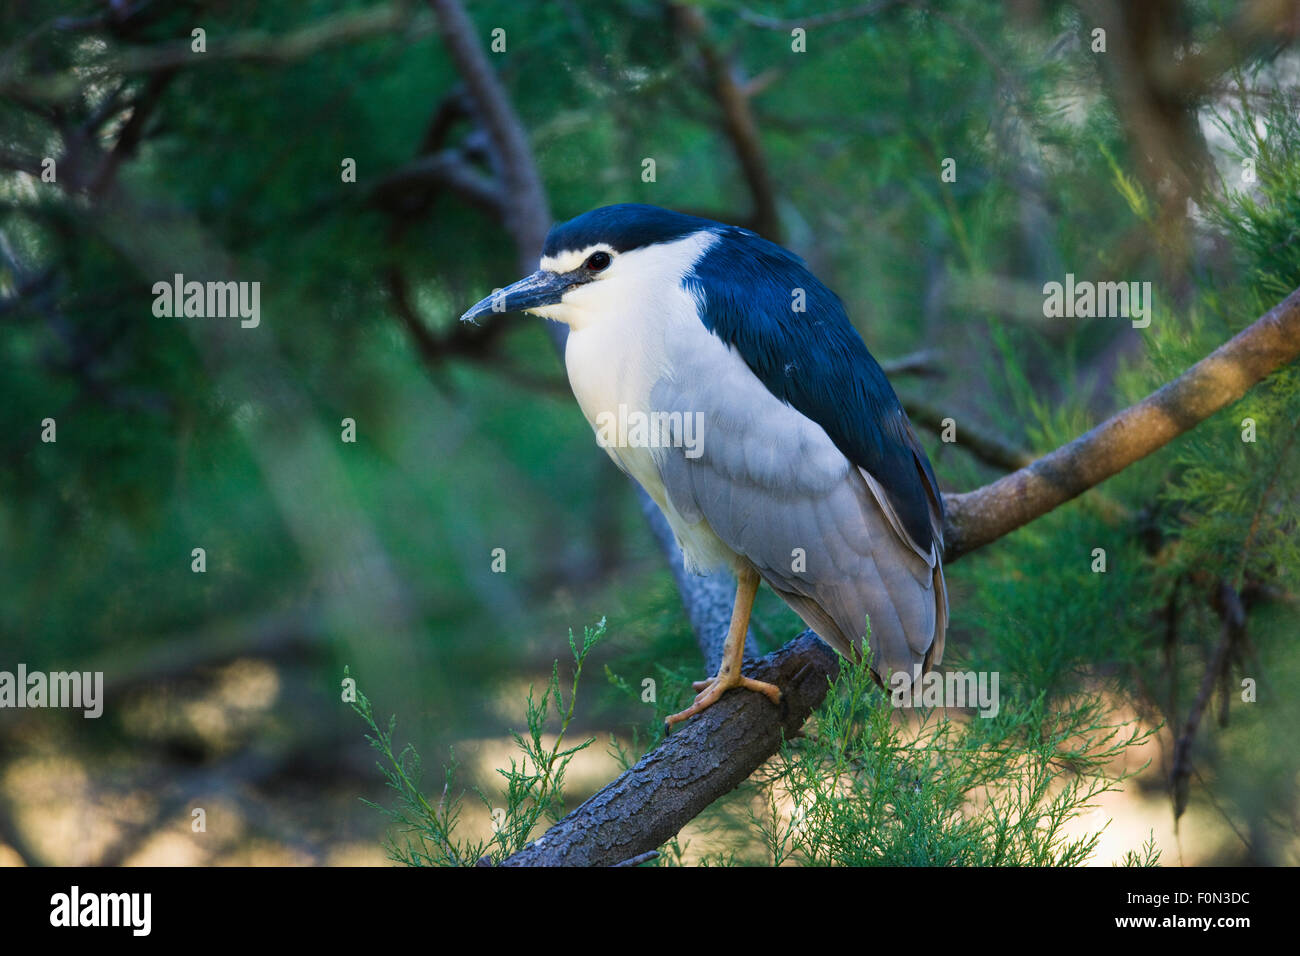 Black-crowned night heron (Nycticorax nycticorax) on branch, Camargue, France, May 2009 Stock Photo